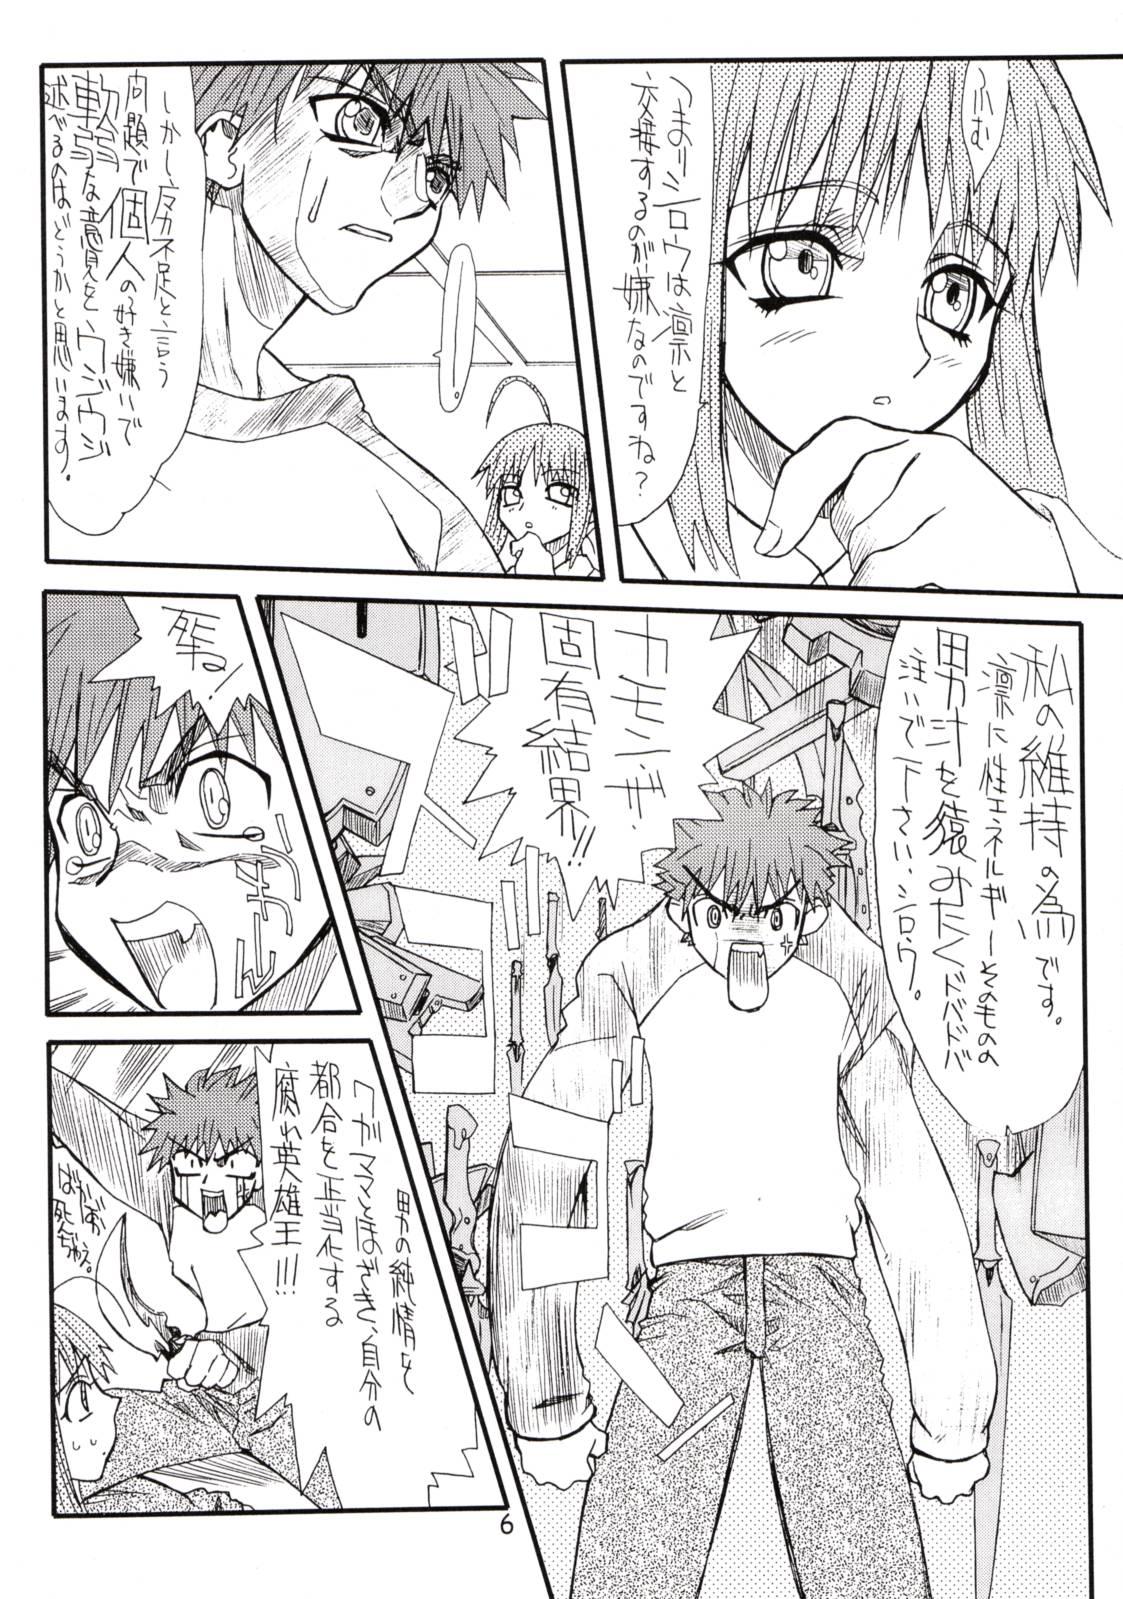 Blowjob Contest Corn 1 - Fate stay night Old Vs Young - Page 5